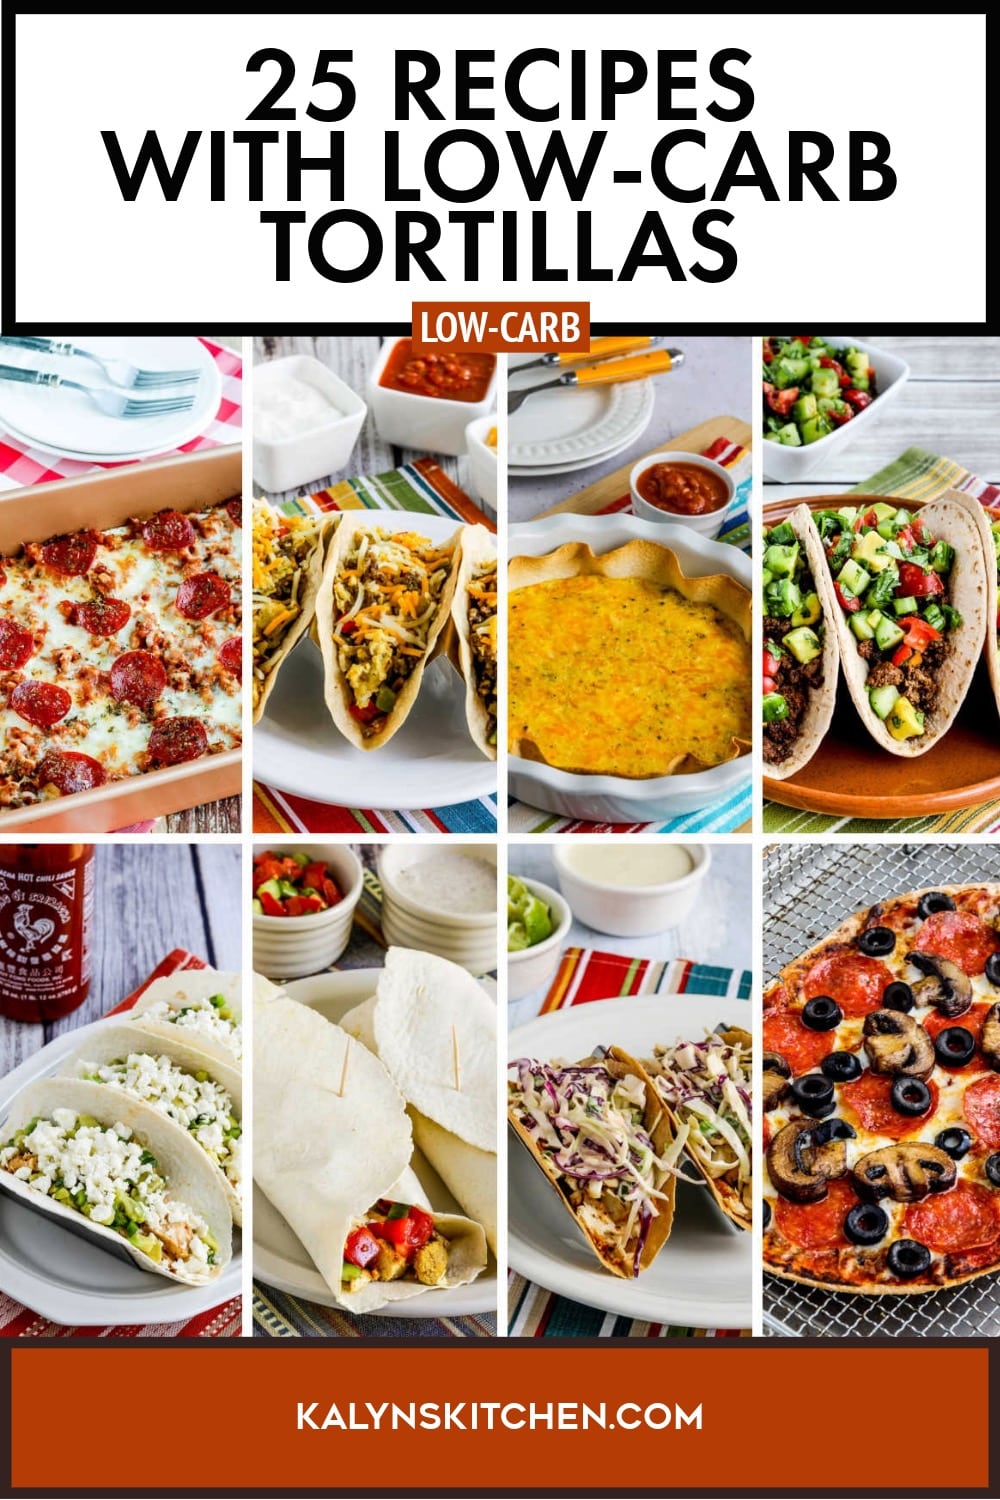  Pinterest image of 25 Recipes with Low-Carb Tortillas